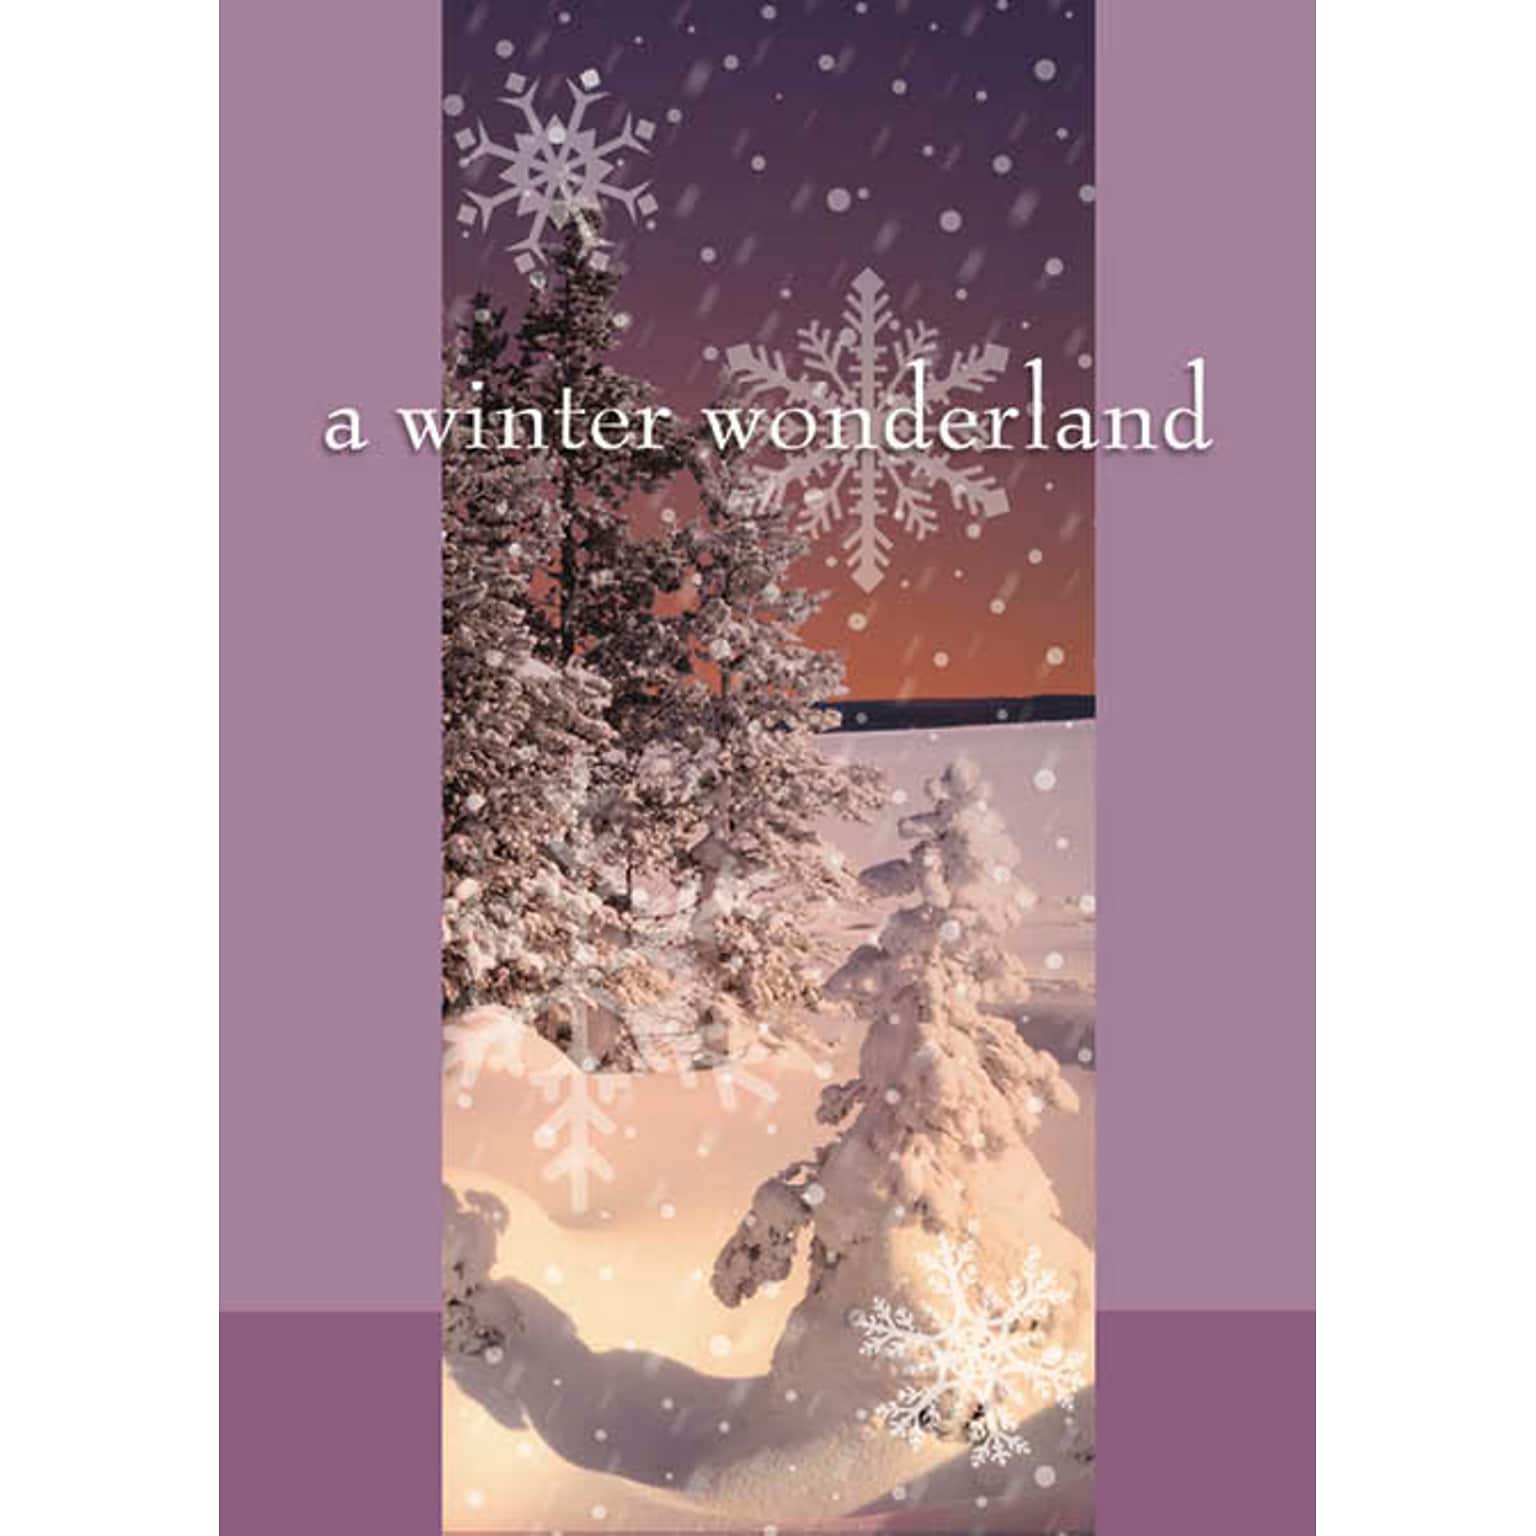 A Winter Wonderland Trees Covered In Snow Holiday Greeting Cards, With A7 Envelopes, 7 x 5, 25 Cards per Set